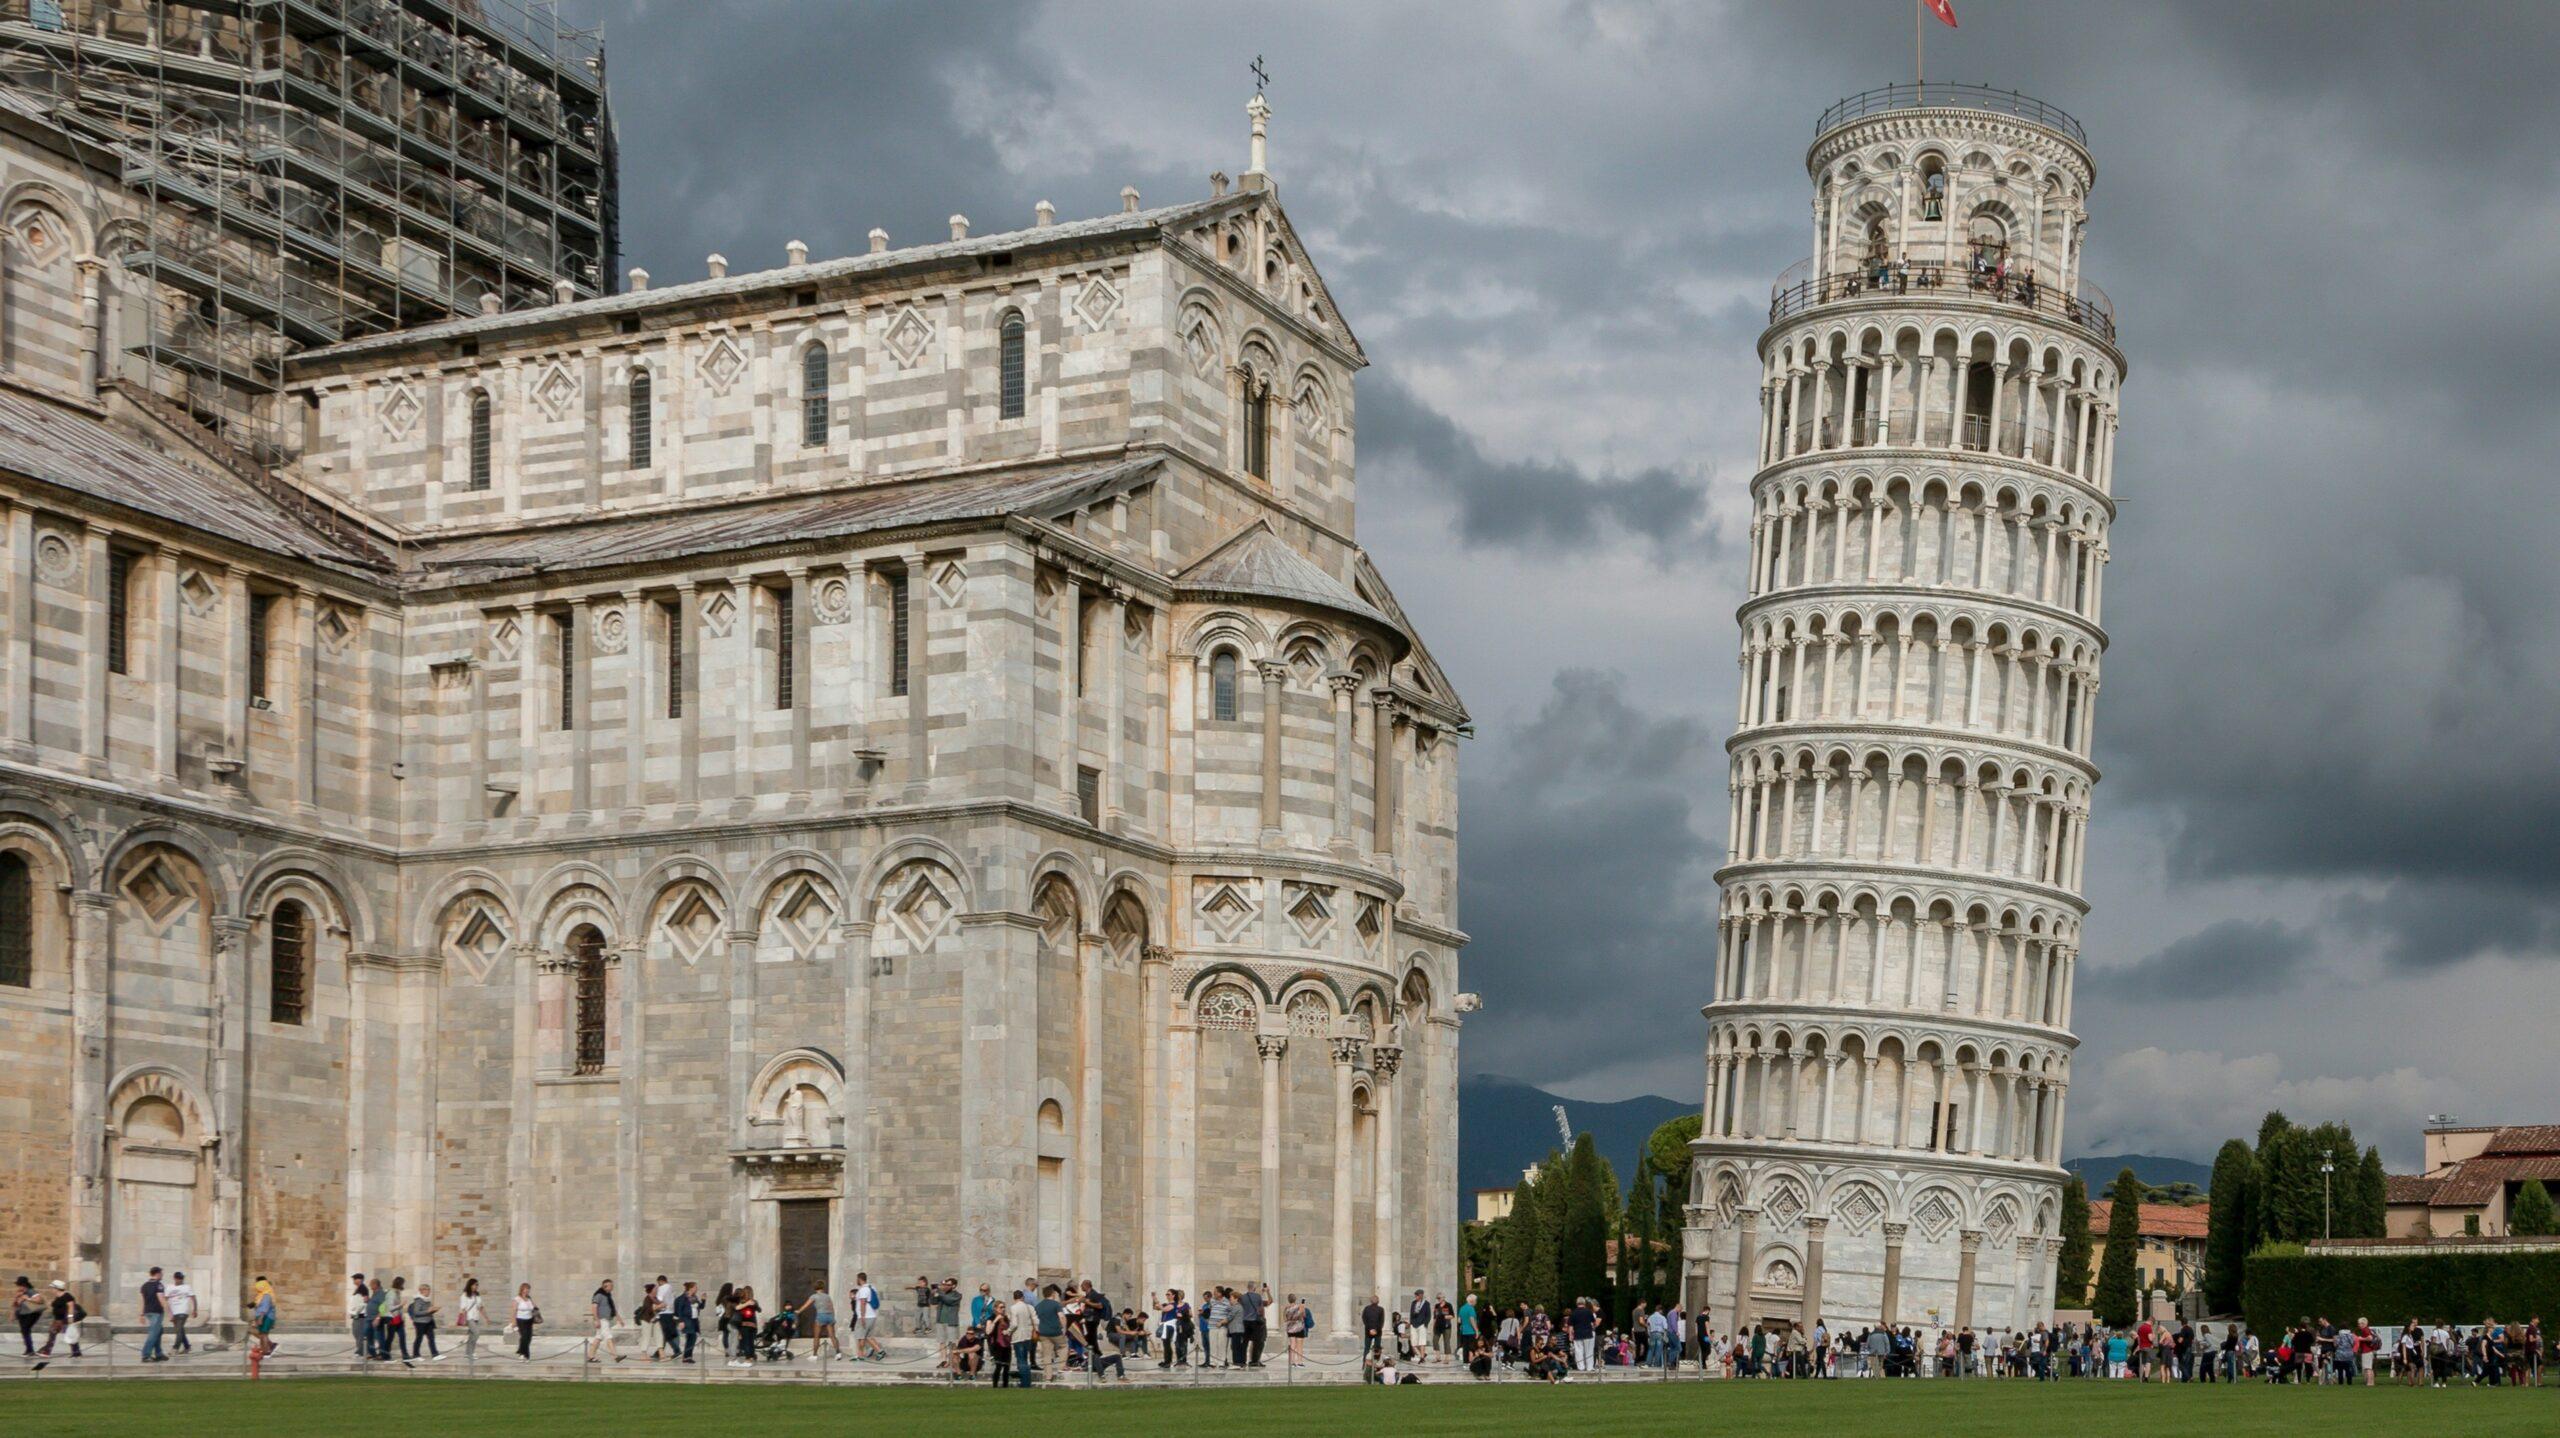 The Leaning Tower of Pisa and the Duomo Pisa (the Pisa cathedral) against a moody backdrop.